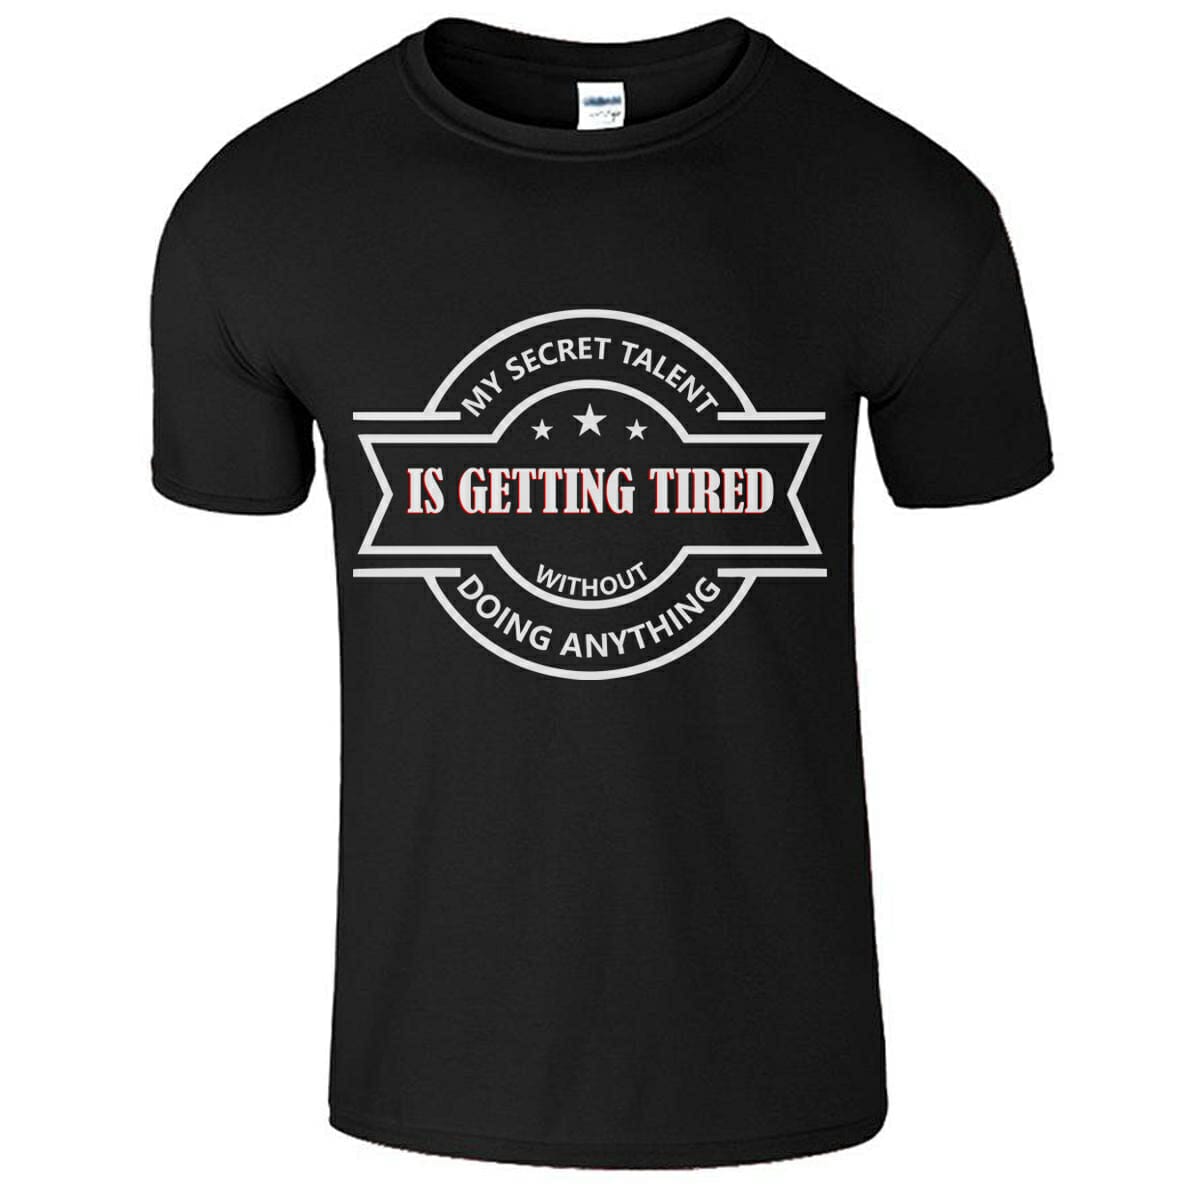 My Secret Talent Is Getting Tired - Funny T-Shirt Design PNG